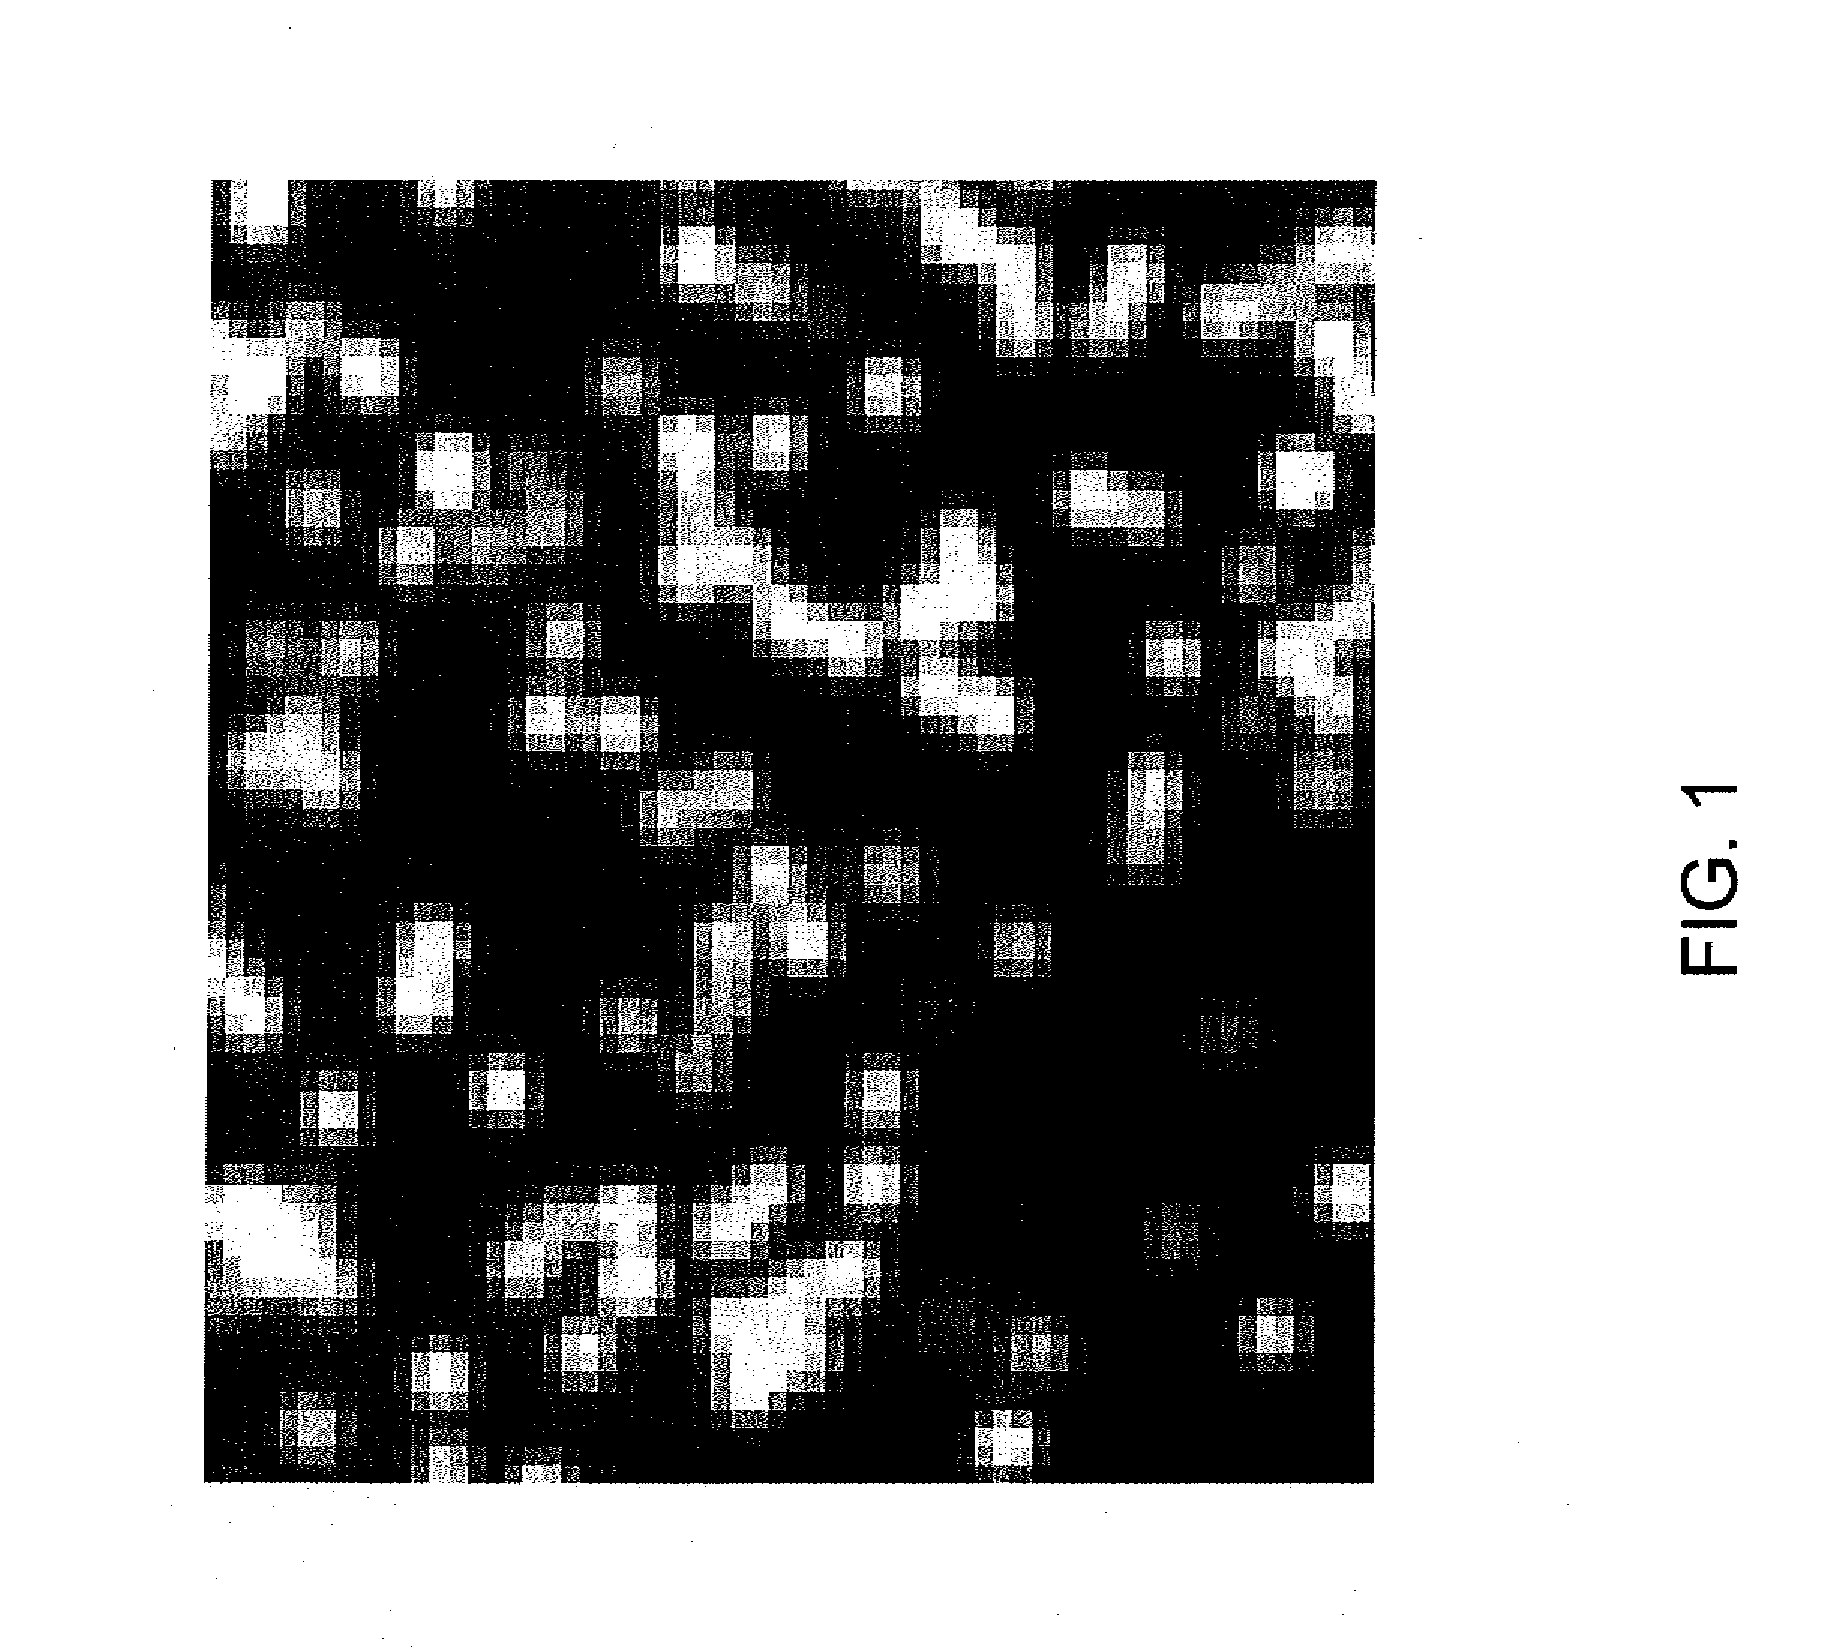 Method and apparatus for image processing for massive parallel DNA sequencing